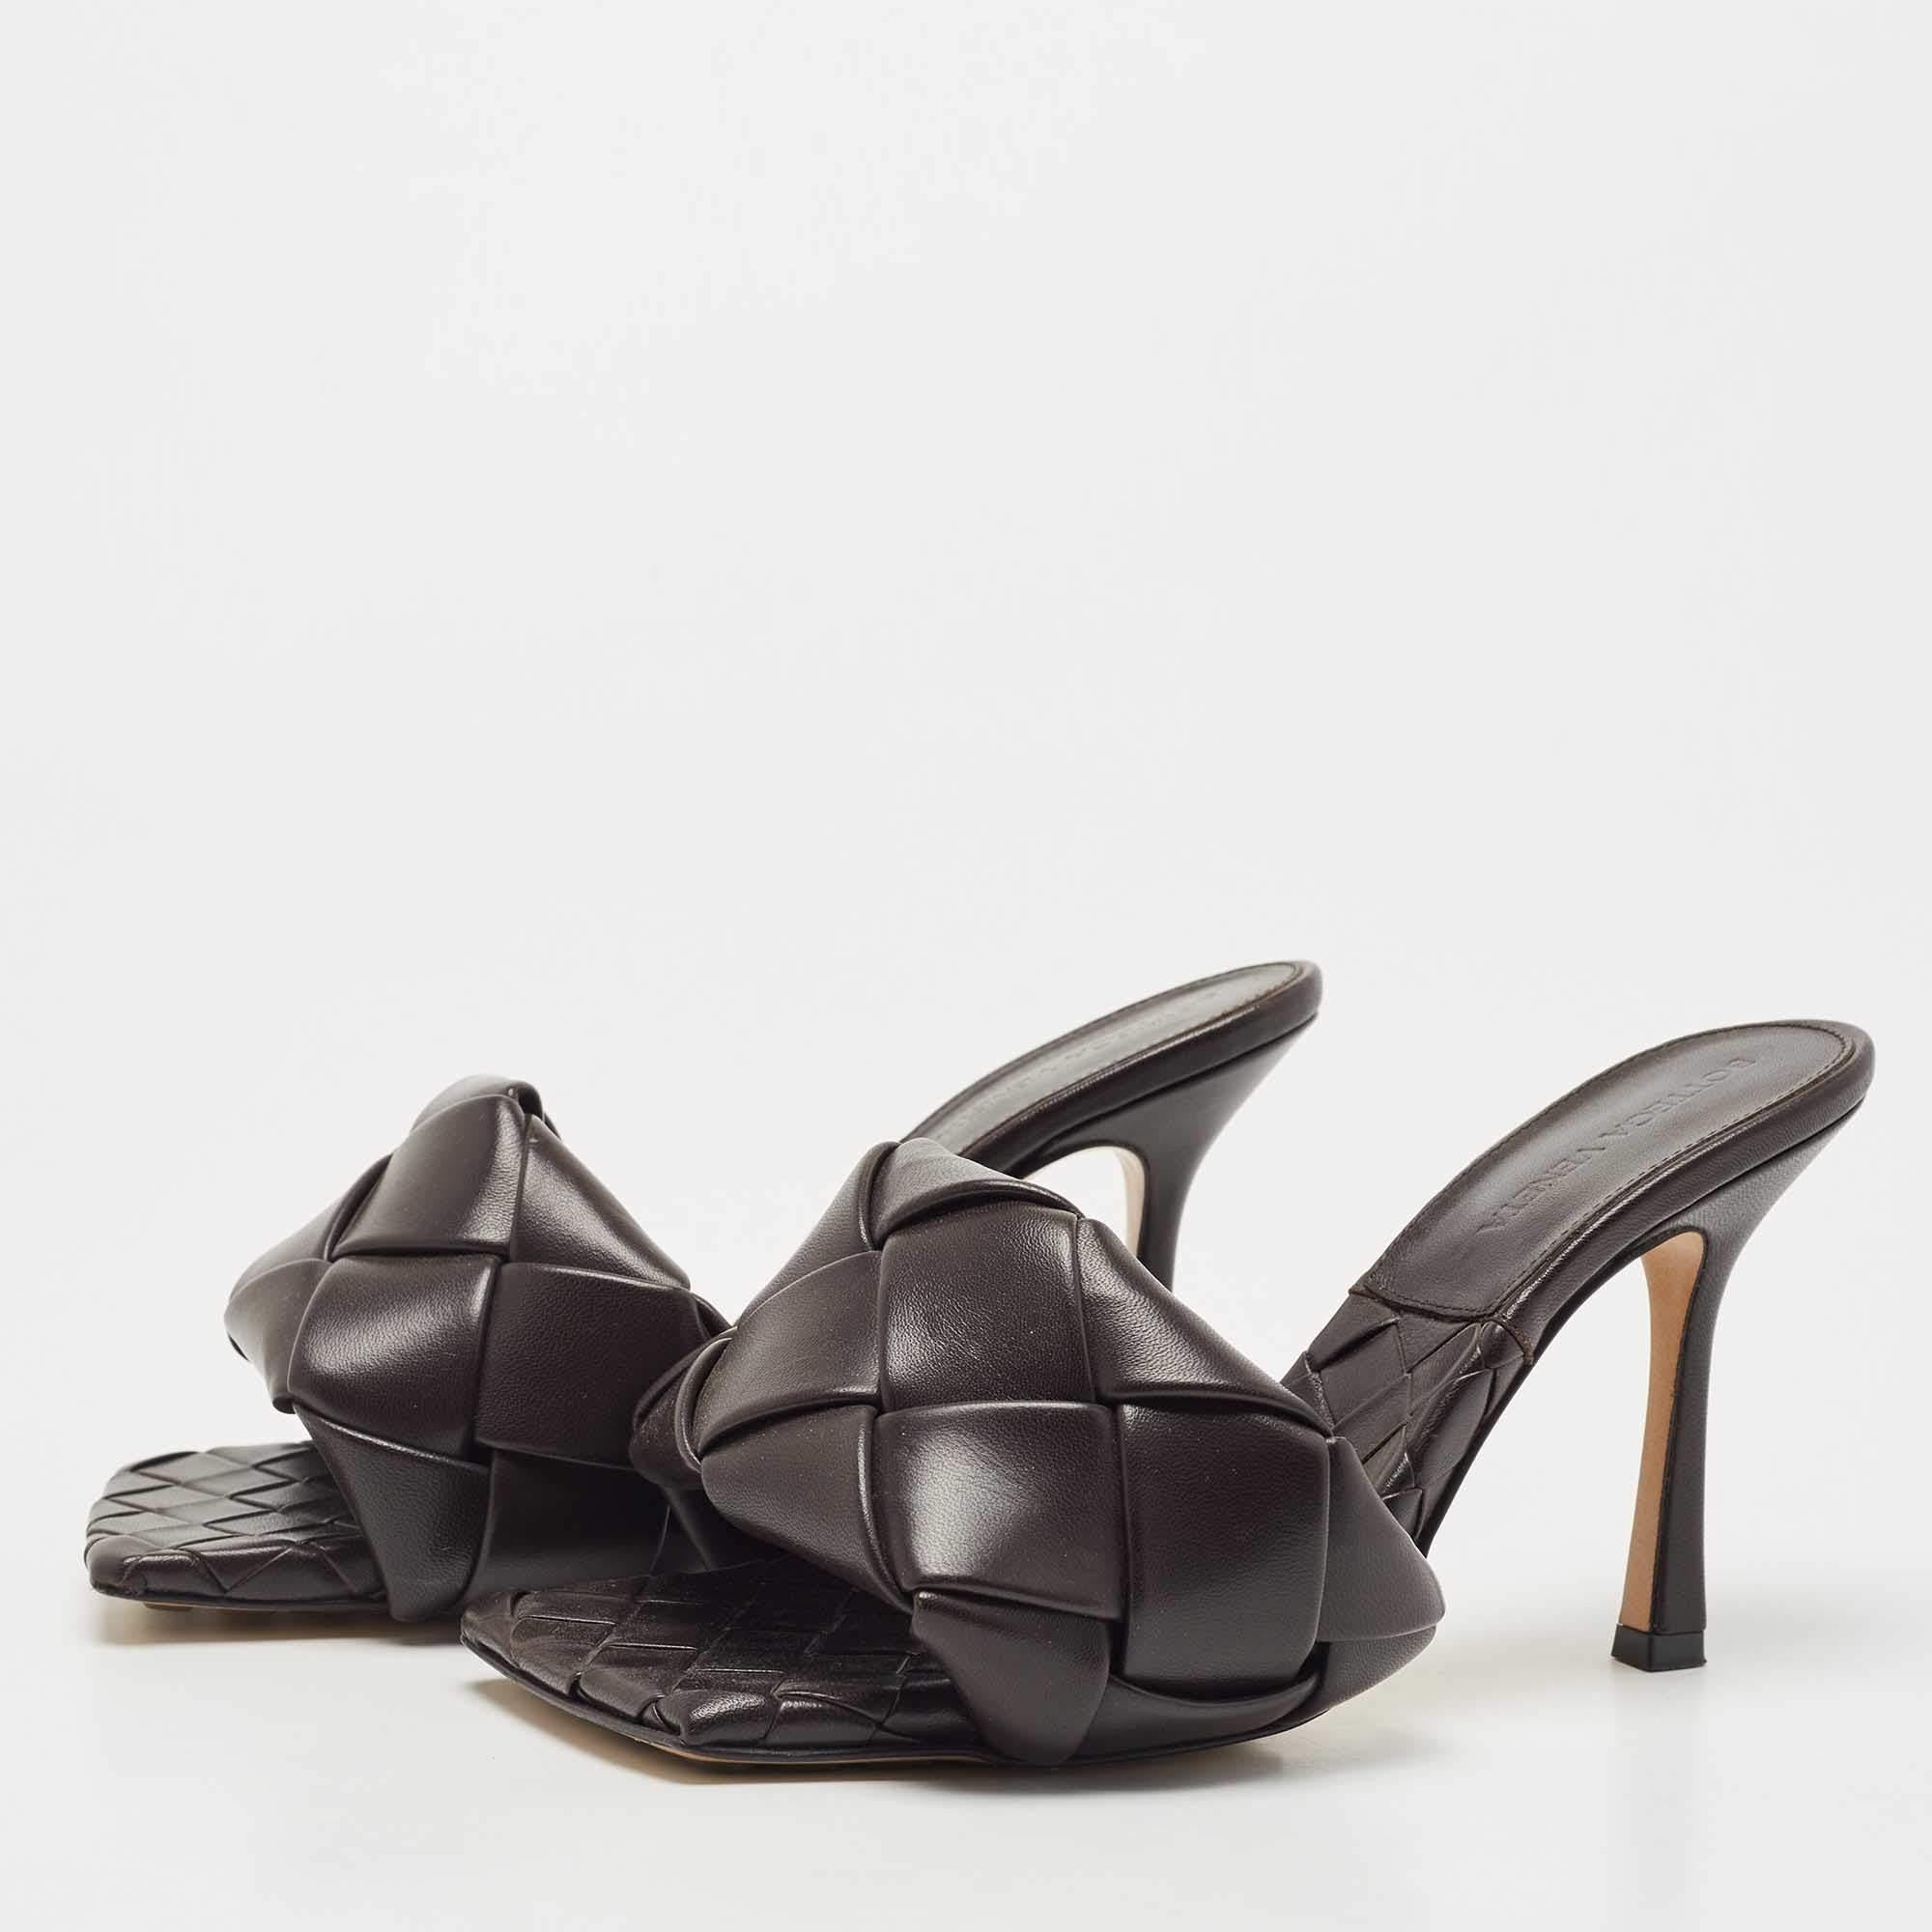 One of the most hot-selling designs, the Bottega Veneta Lido sandals adorn the feet of top celebrities and influencers. These beauties have been crafted from Bottega Veneta then set on tall heels. Style these sandals with pantsuits on days you want